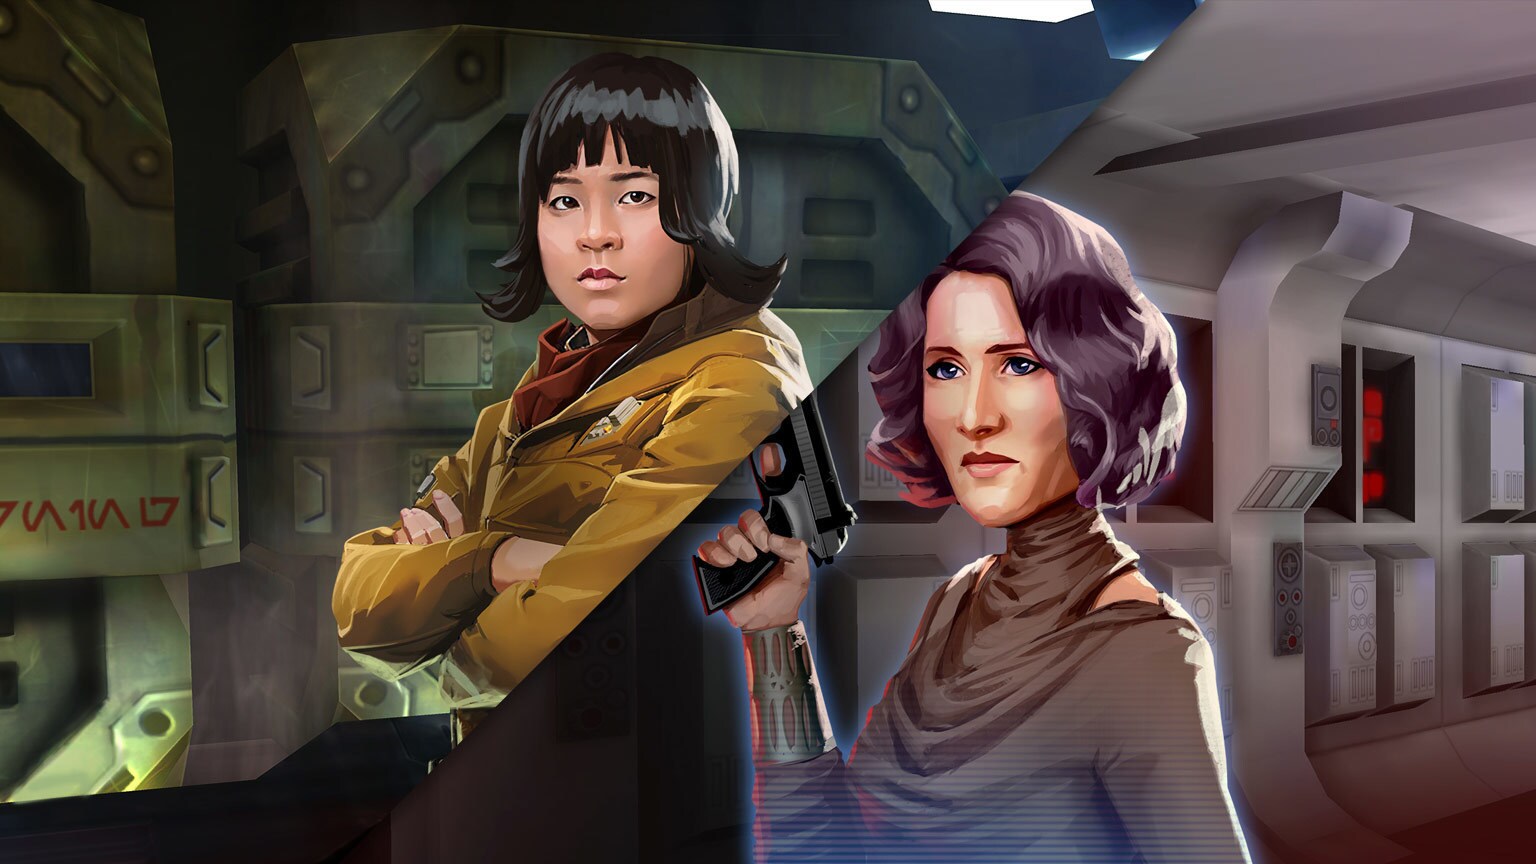 Designing The Last Jedi's Rose Tico and Amilyn Holdo for Galaxy of Heroes